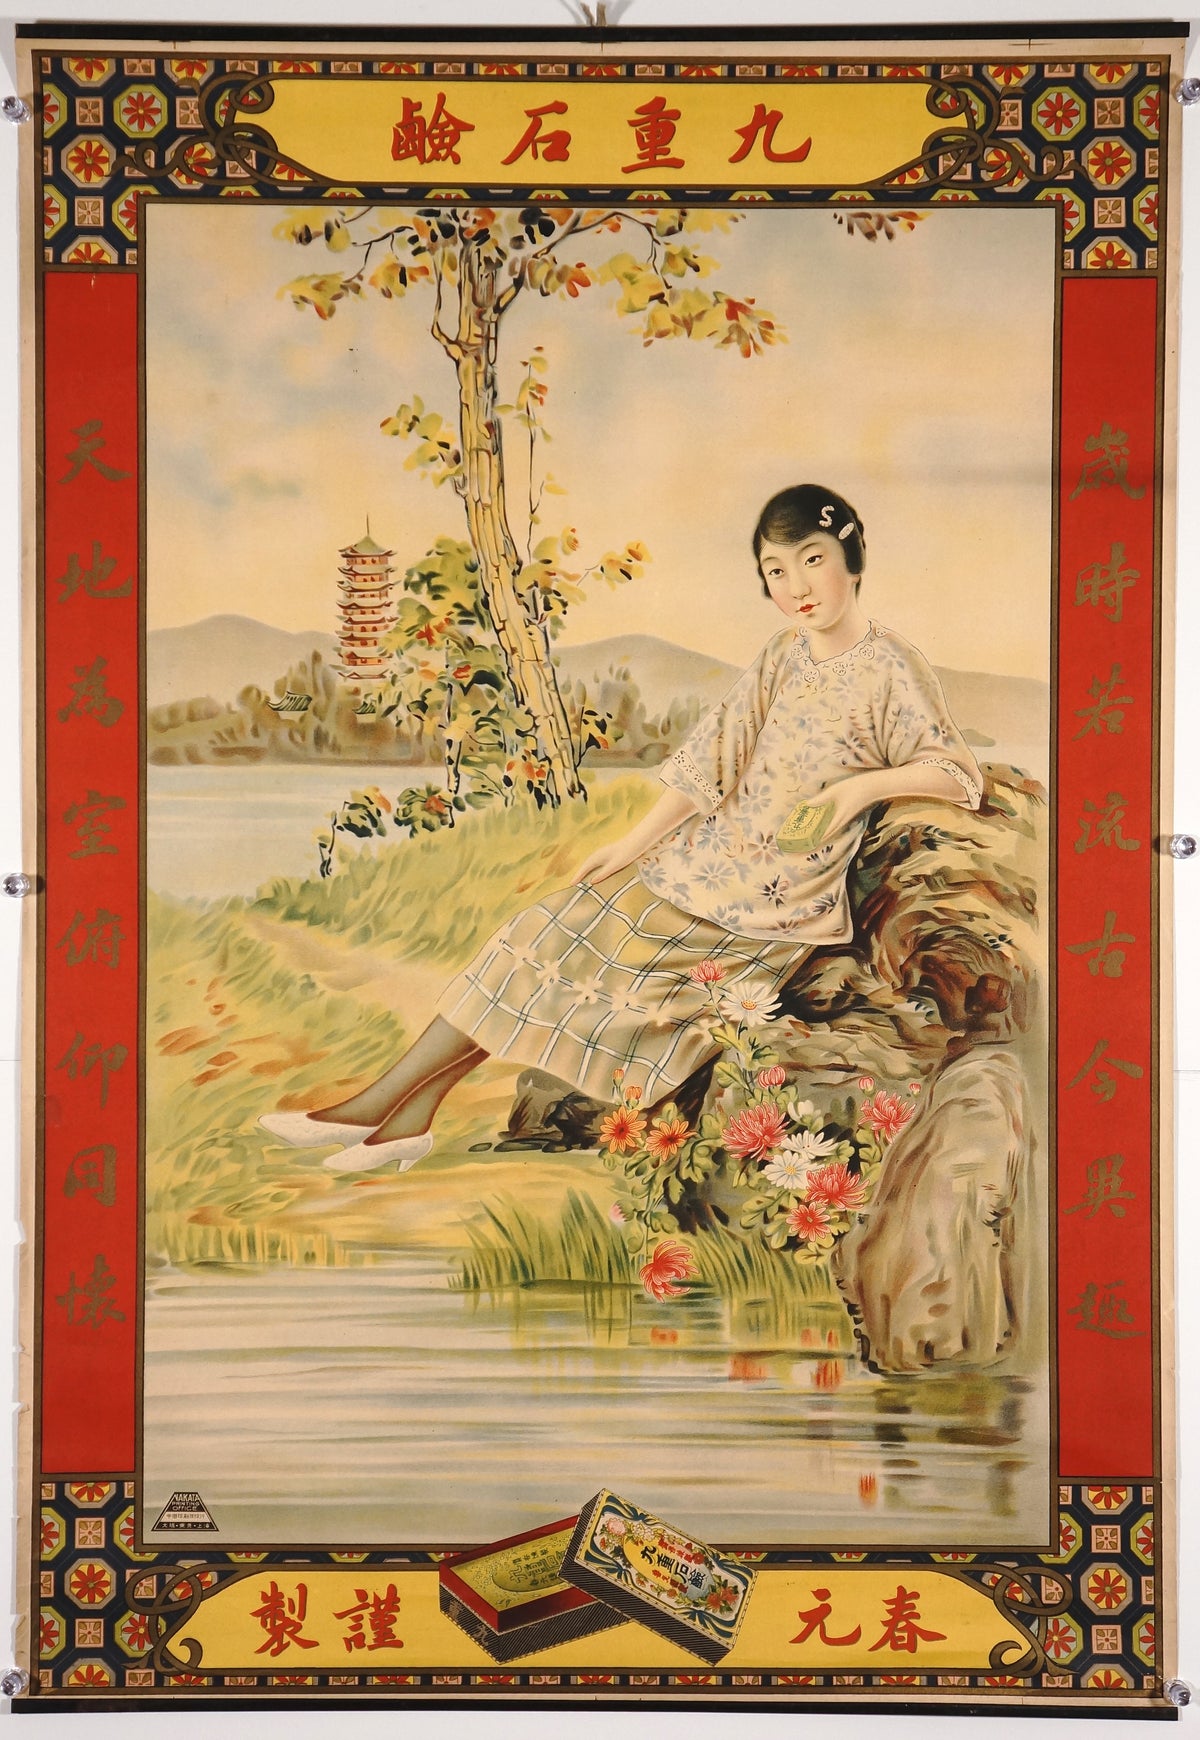 Chinese Soap ad - Authentic Vintage Poster